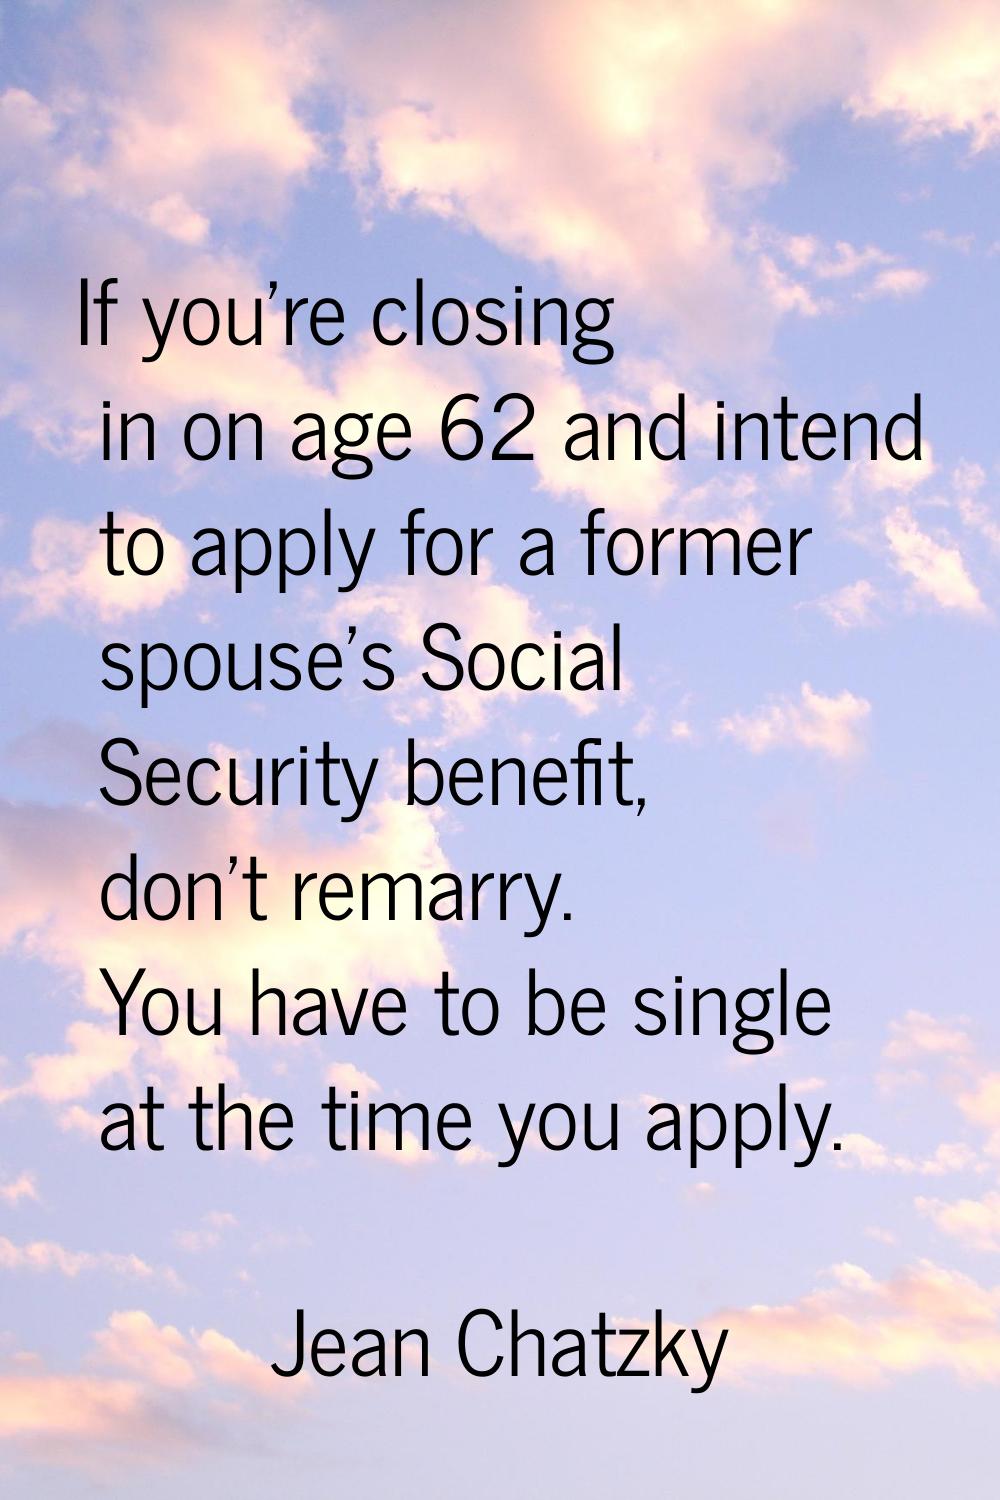 If you're closing in on age 62 and intend to apply for a former spouse's Social Security benefit, d